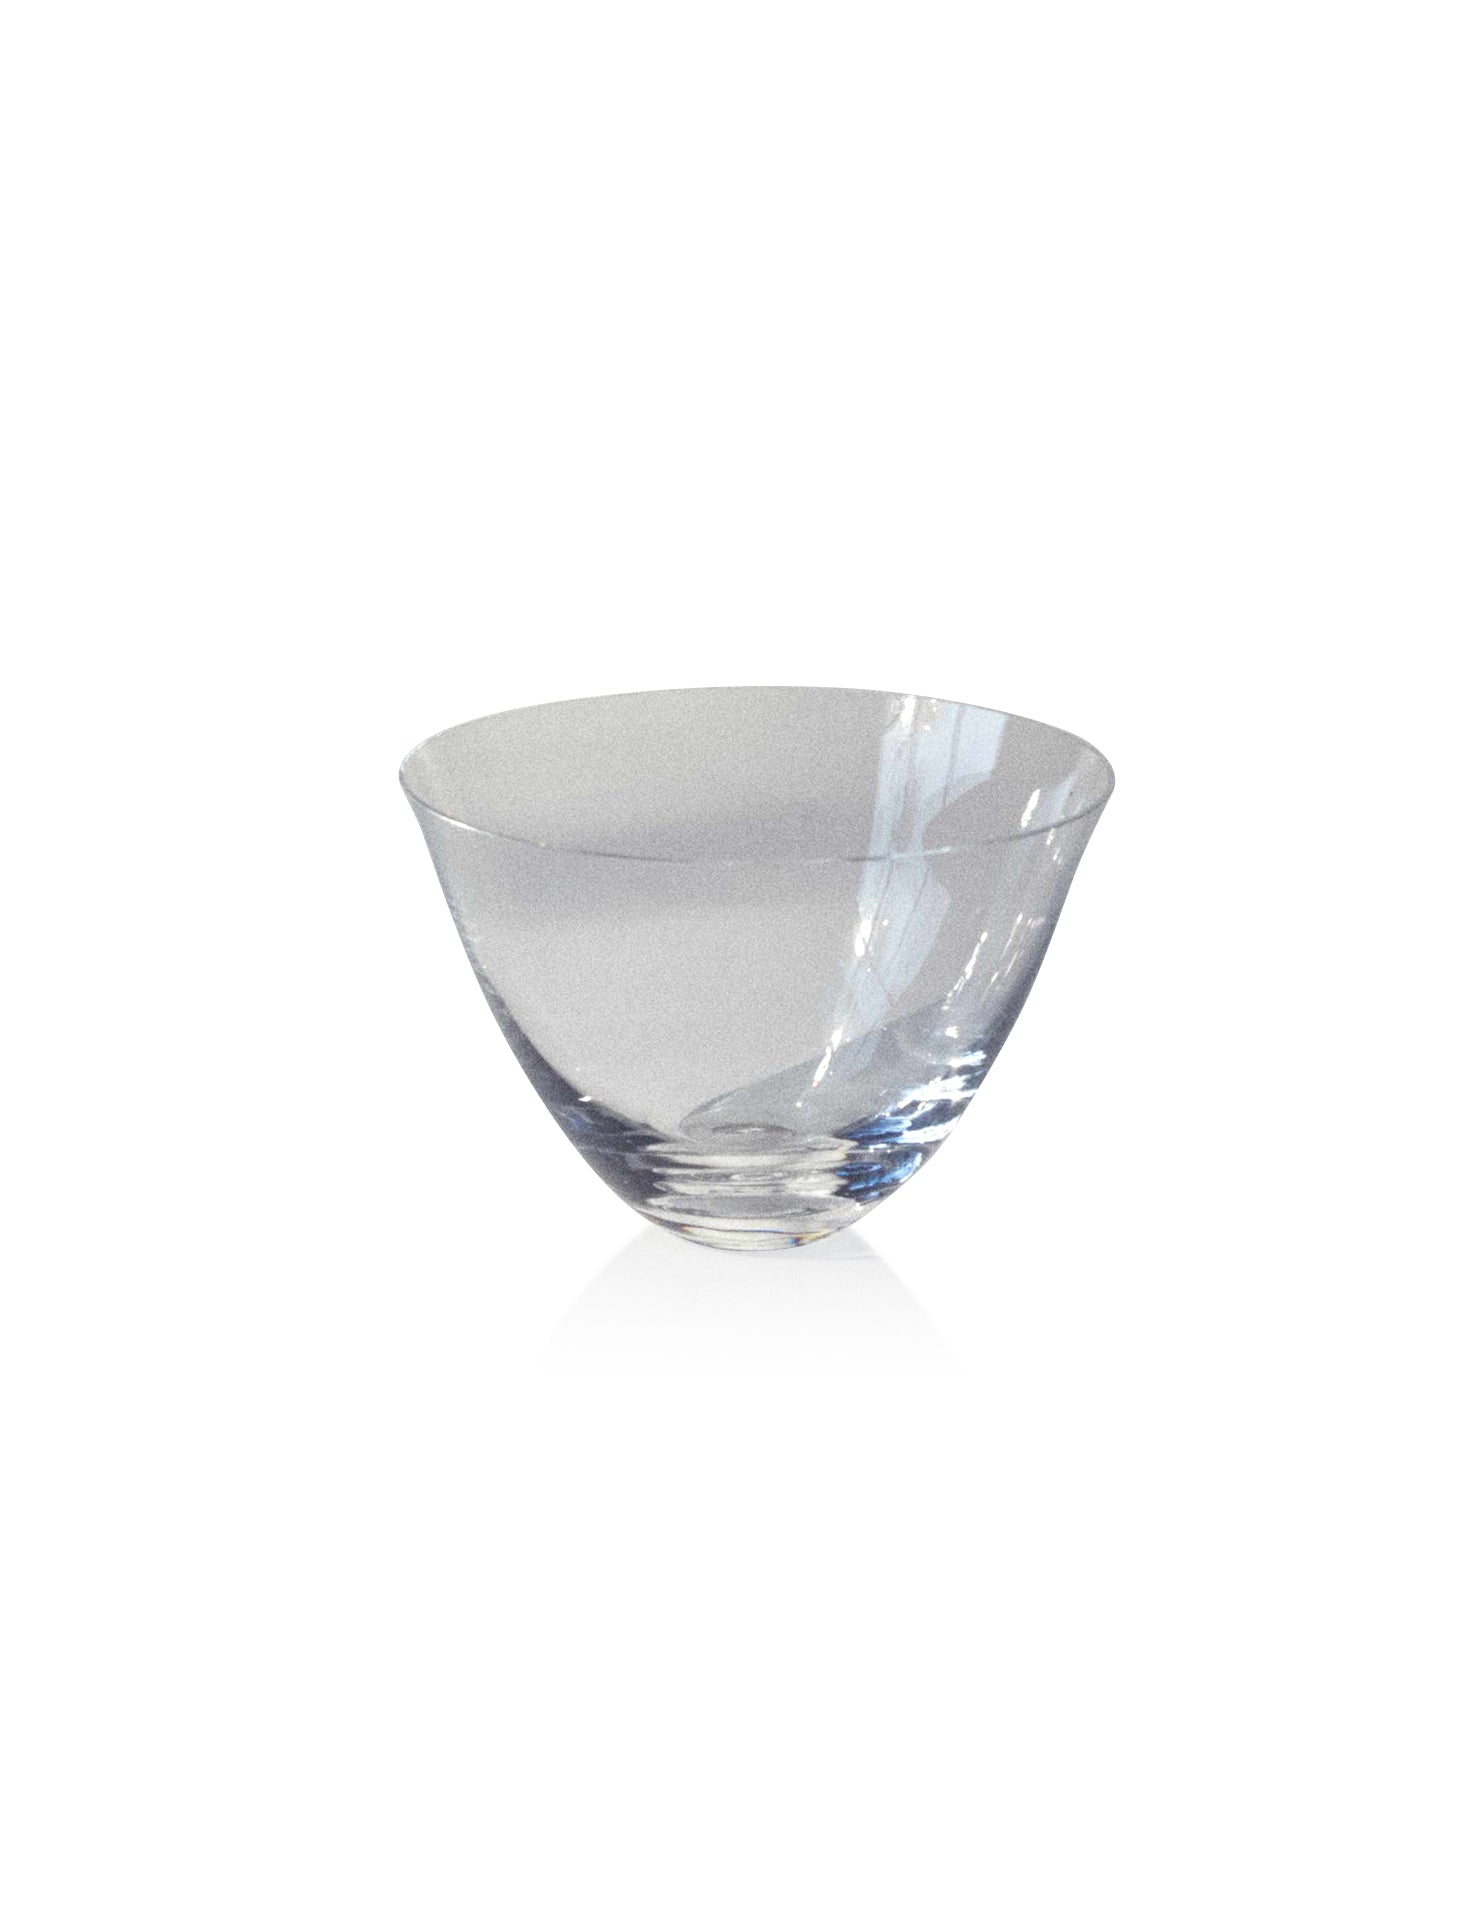 Simple Bowl, Small